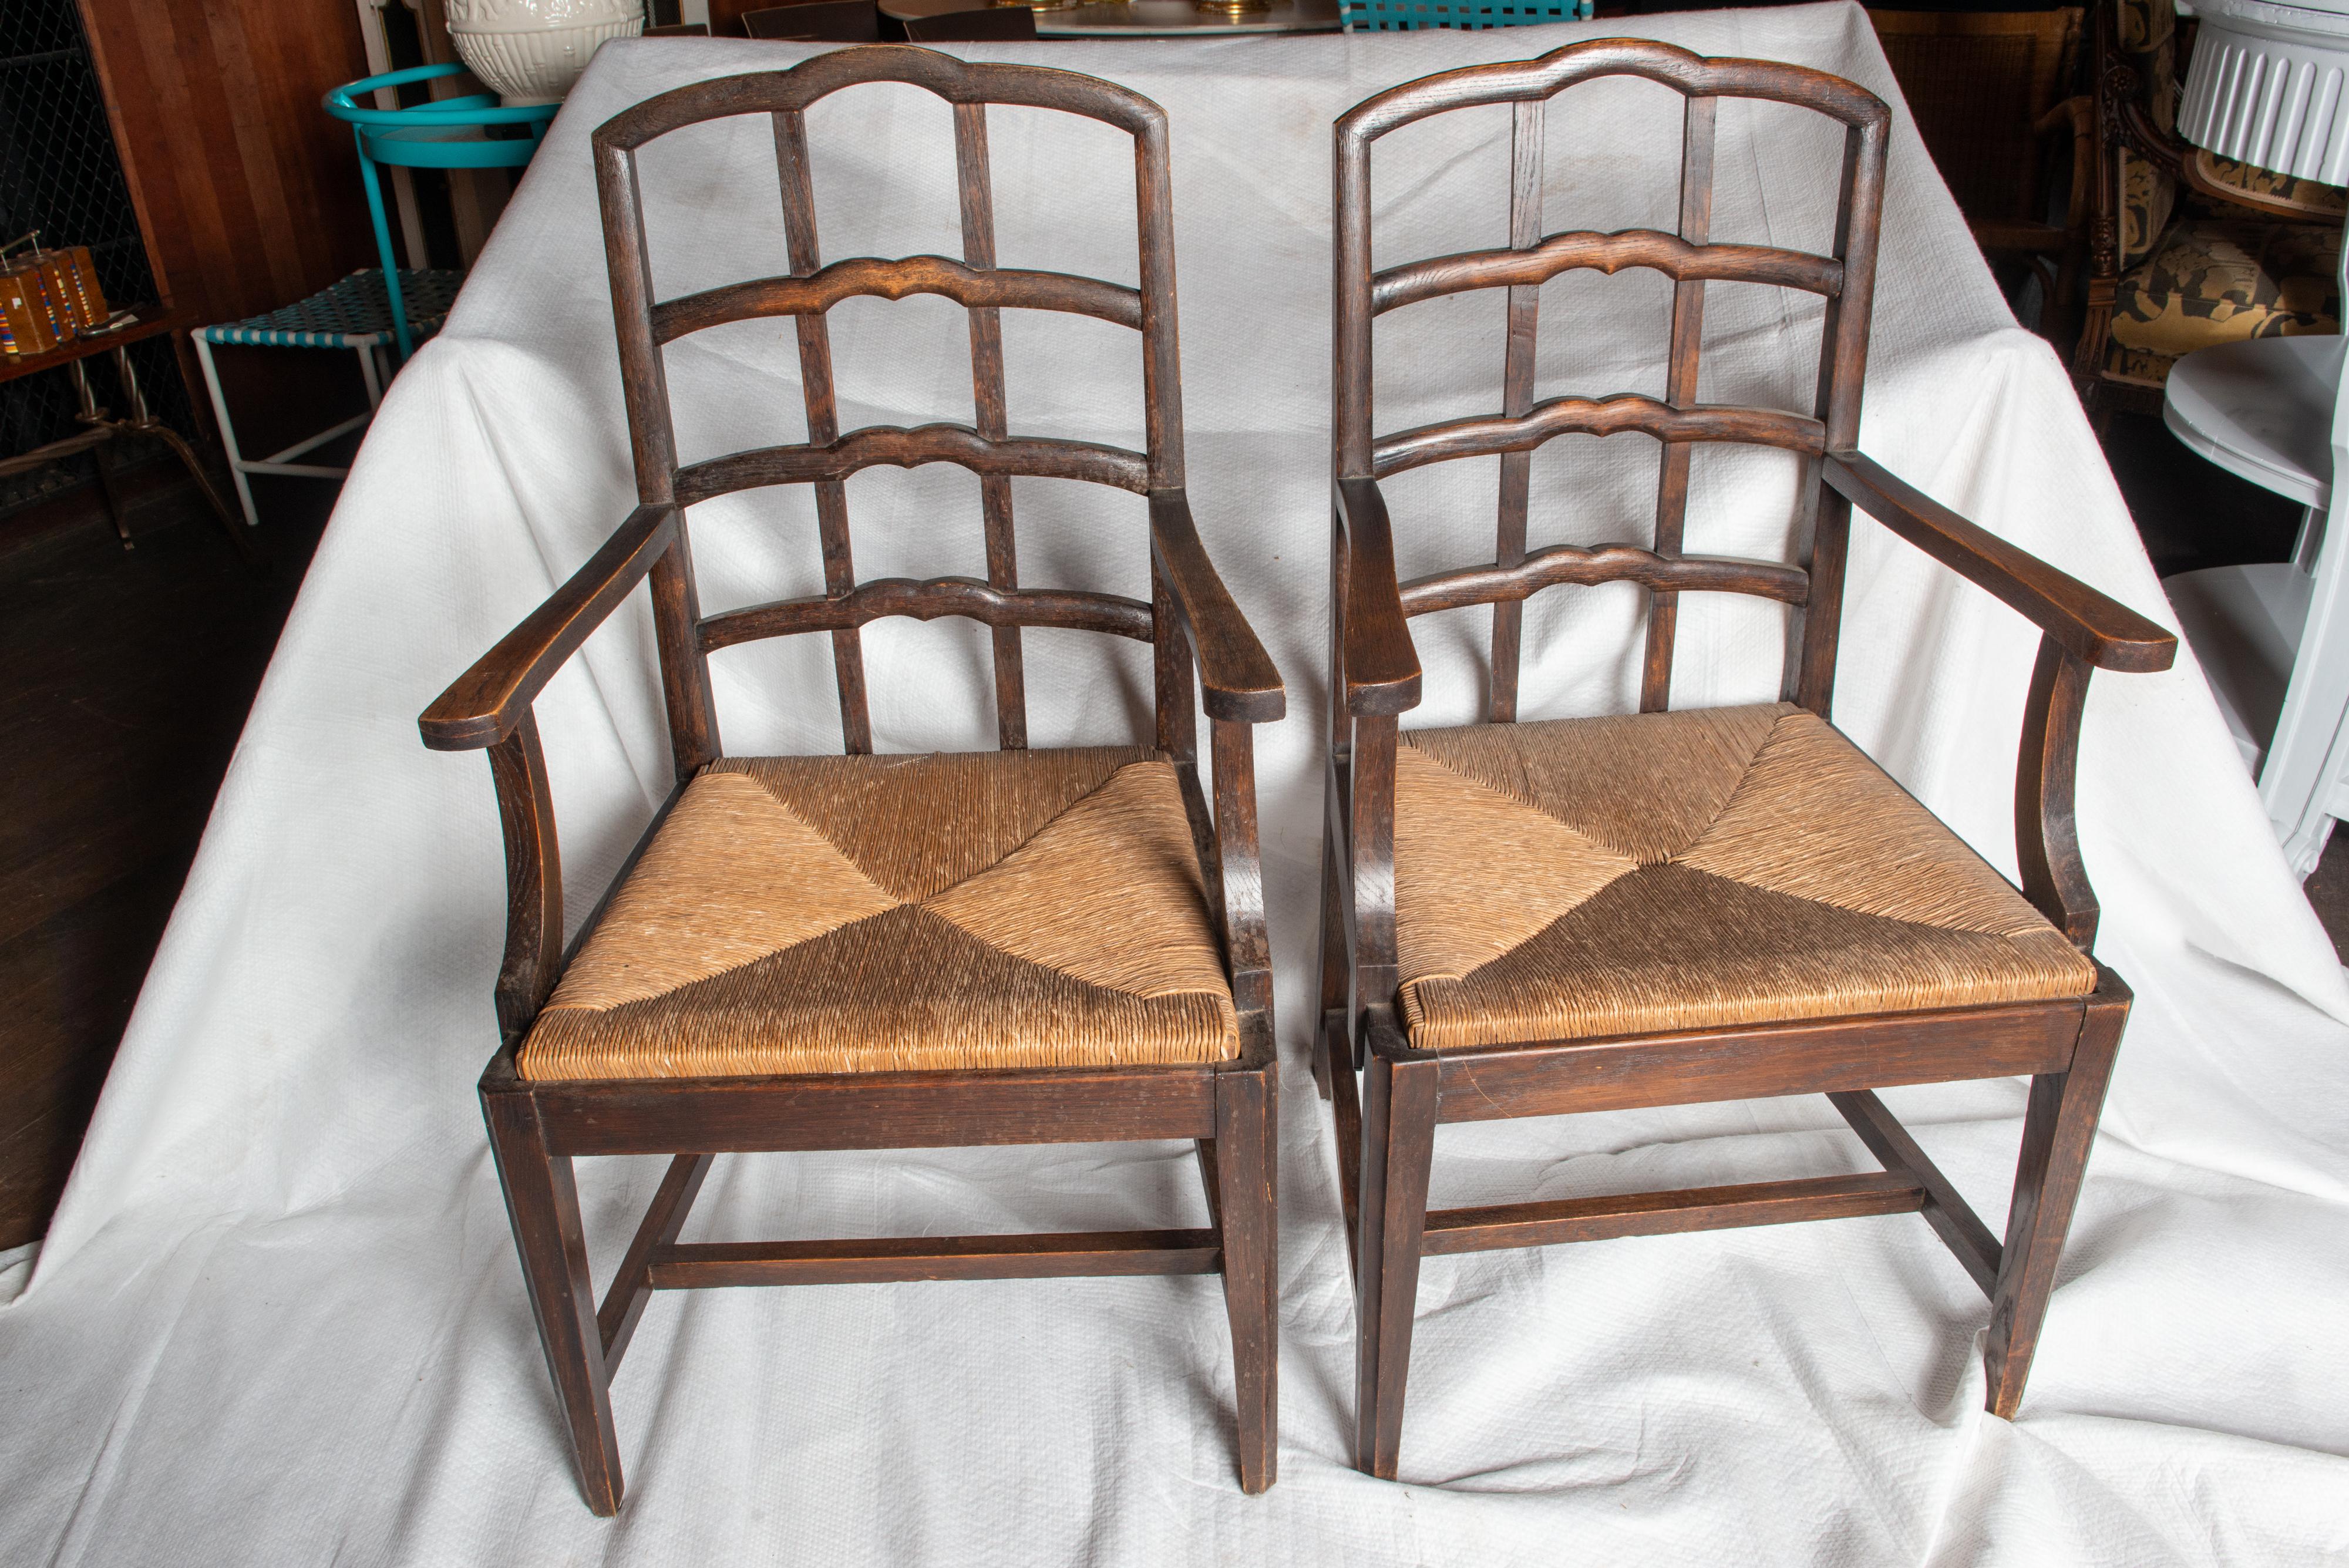 A sturdy pair of stylish early 20th century Dutch wood arm chairs with rush seats. Chairs have a very interesting and comfortable seat back design.
A versatile pair of chairs that would enhance any style interior.